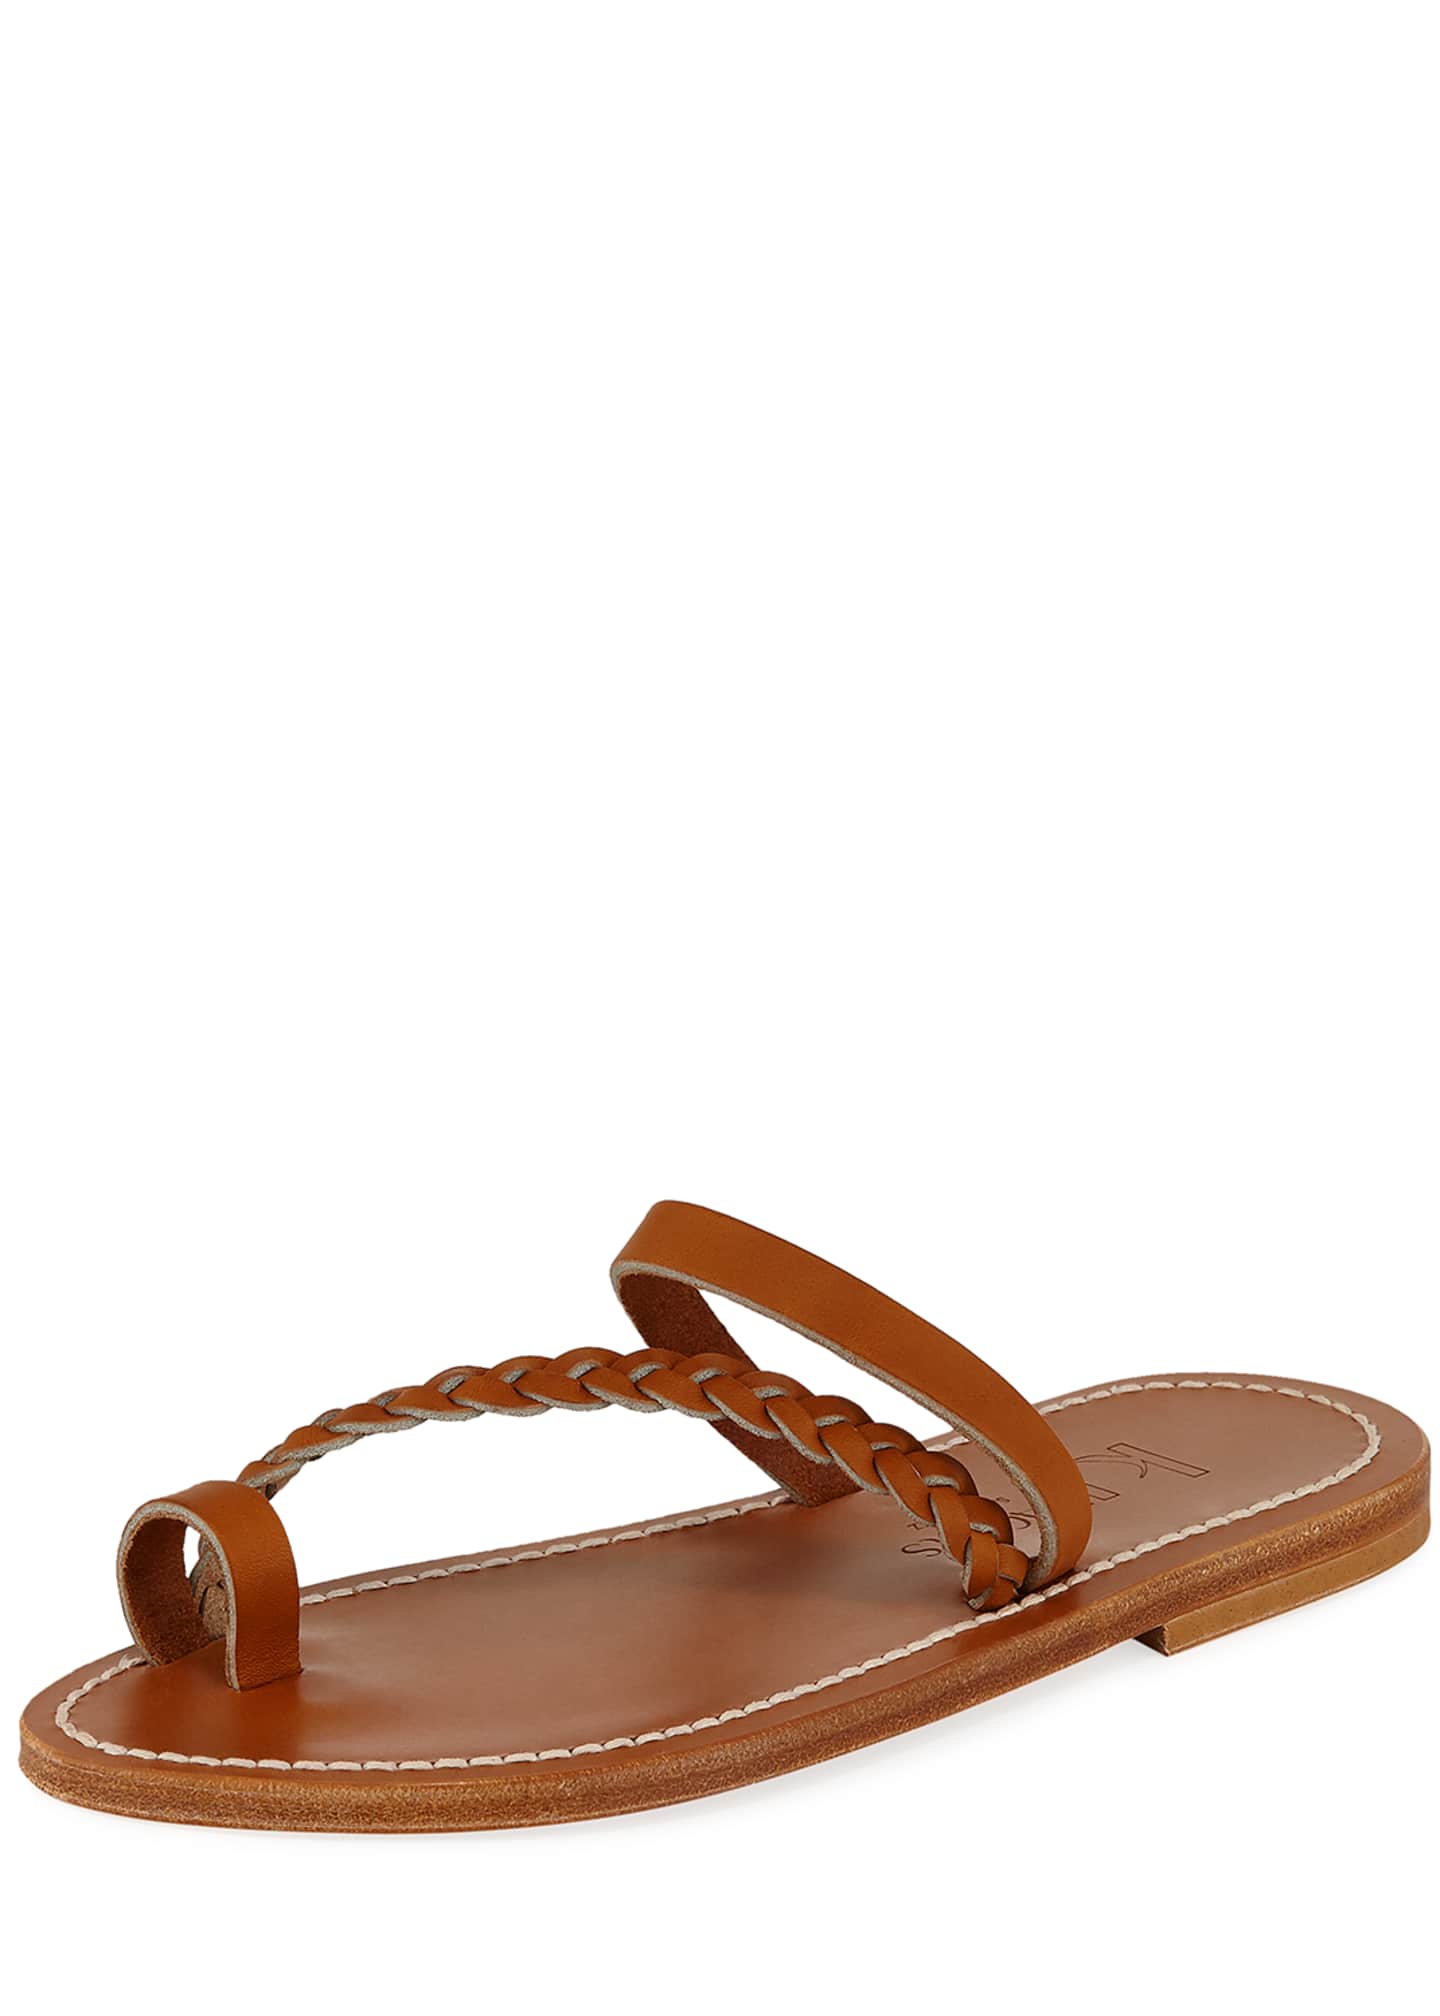 K. Jacques Isaure Braided Leather Flat Sandals - Bergdorf Goodman